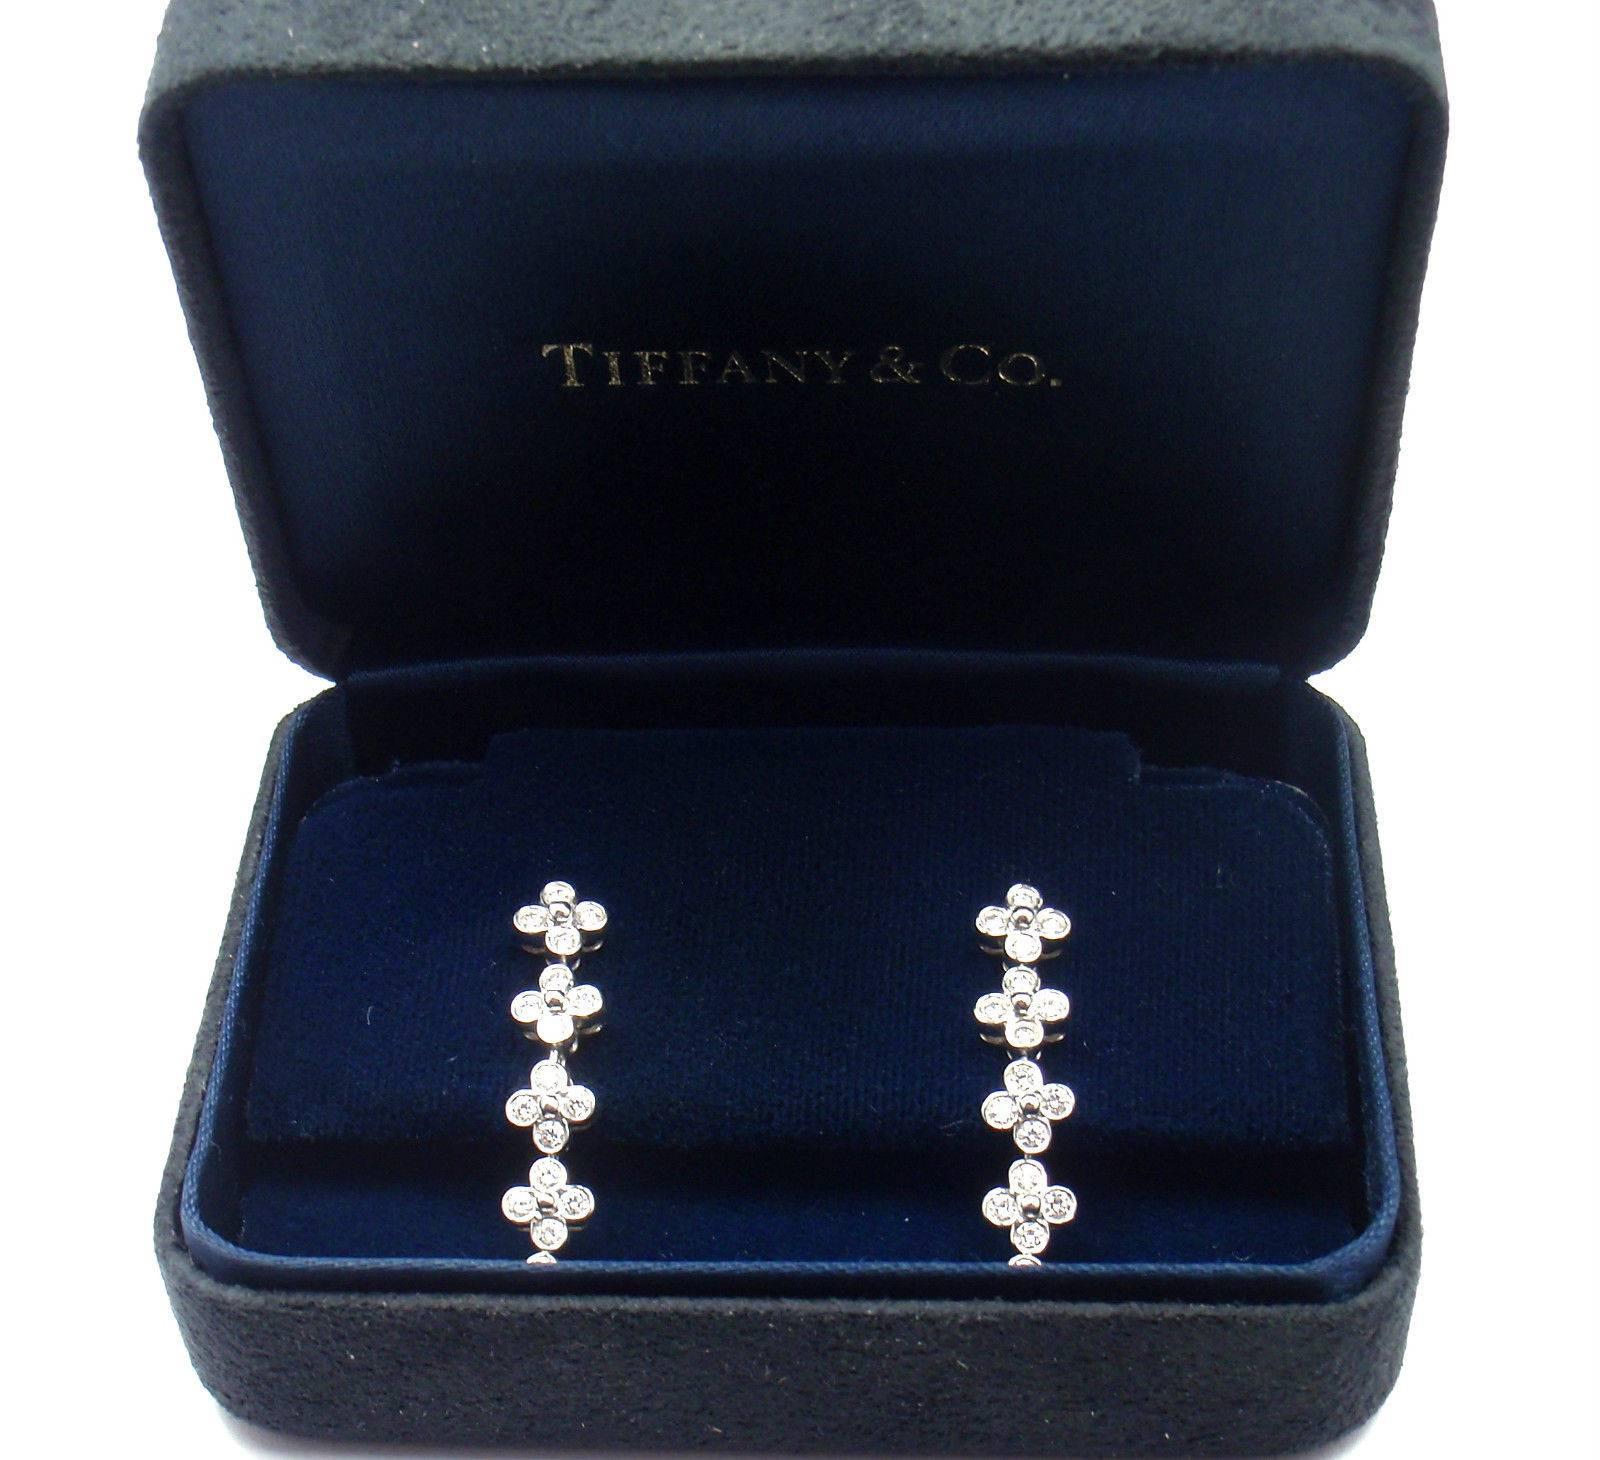 Platinum Diamond Drop Dangle 5 Flower Lace Earrings by Tiffany & Co. 
With 40 round brilliant cut diamonds  
t/w = .80ct  VS1 clarity G color
These earrings are made for pieced ears.
These earrings come with Tiffany & Co Box and a Replacement